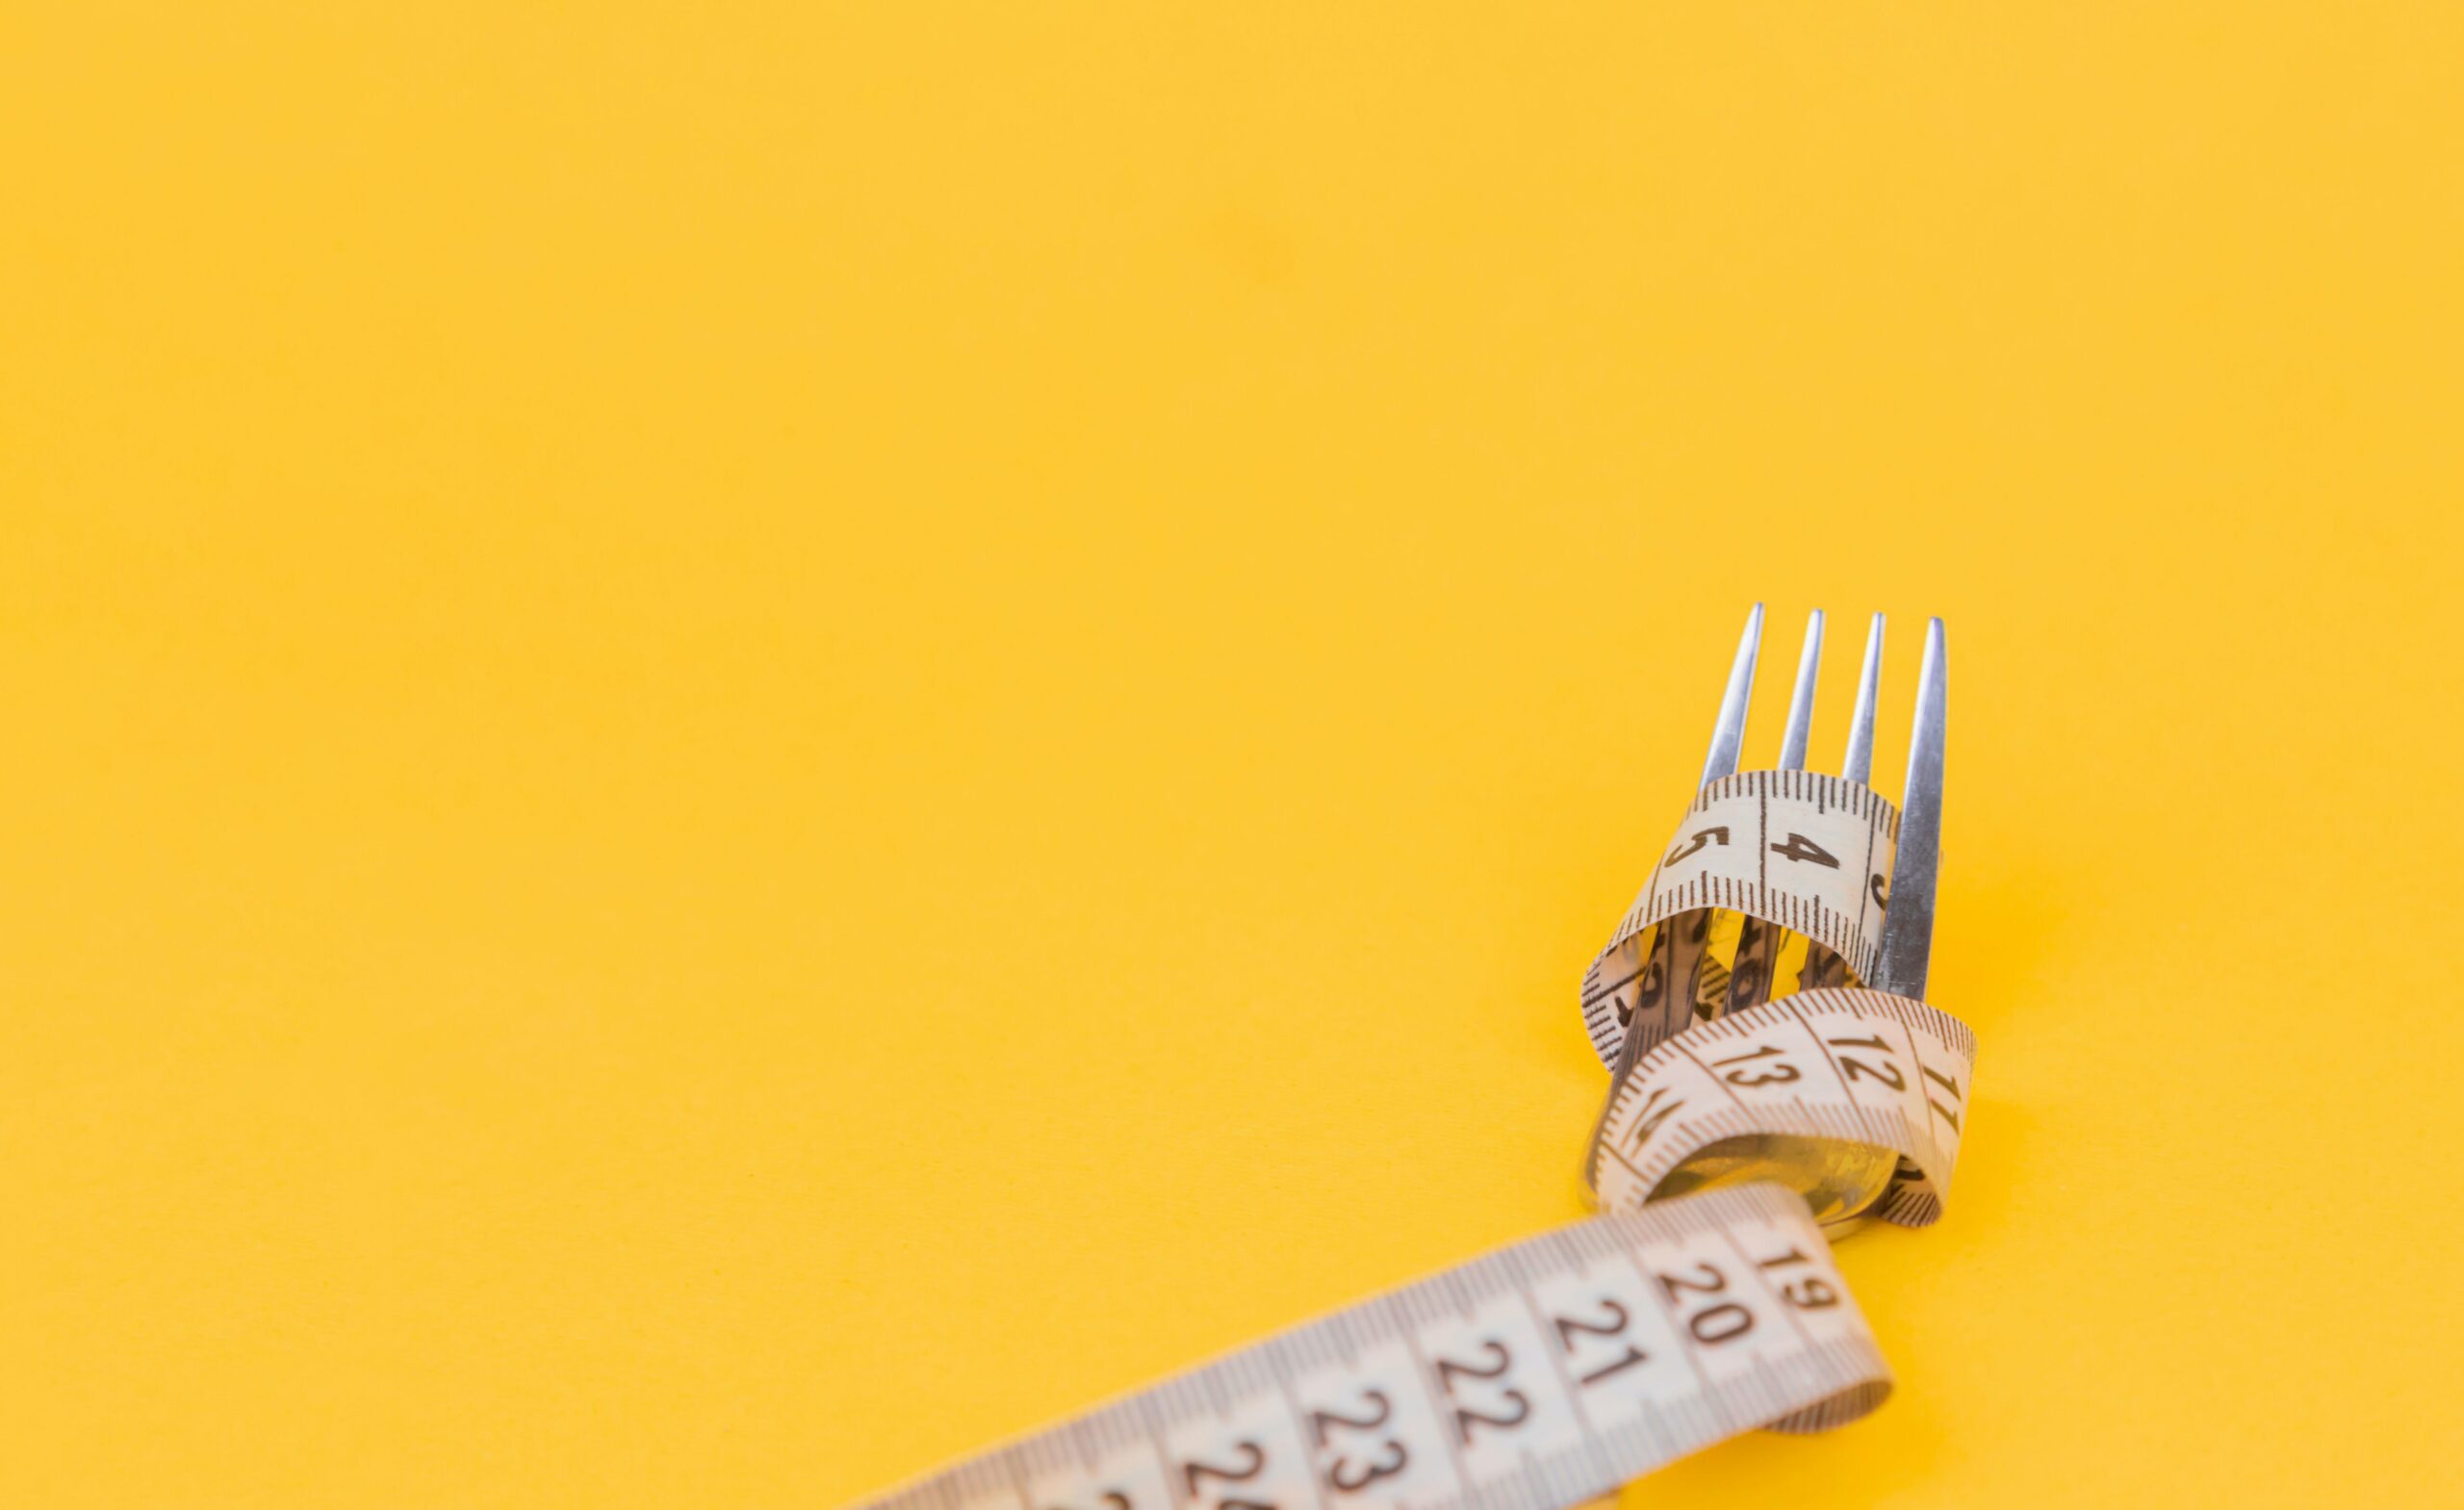 Fork with measuring tap wrapped around it on a yellow background